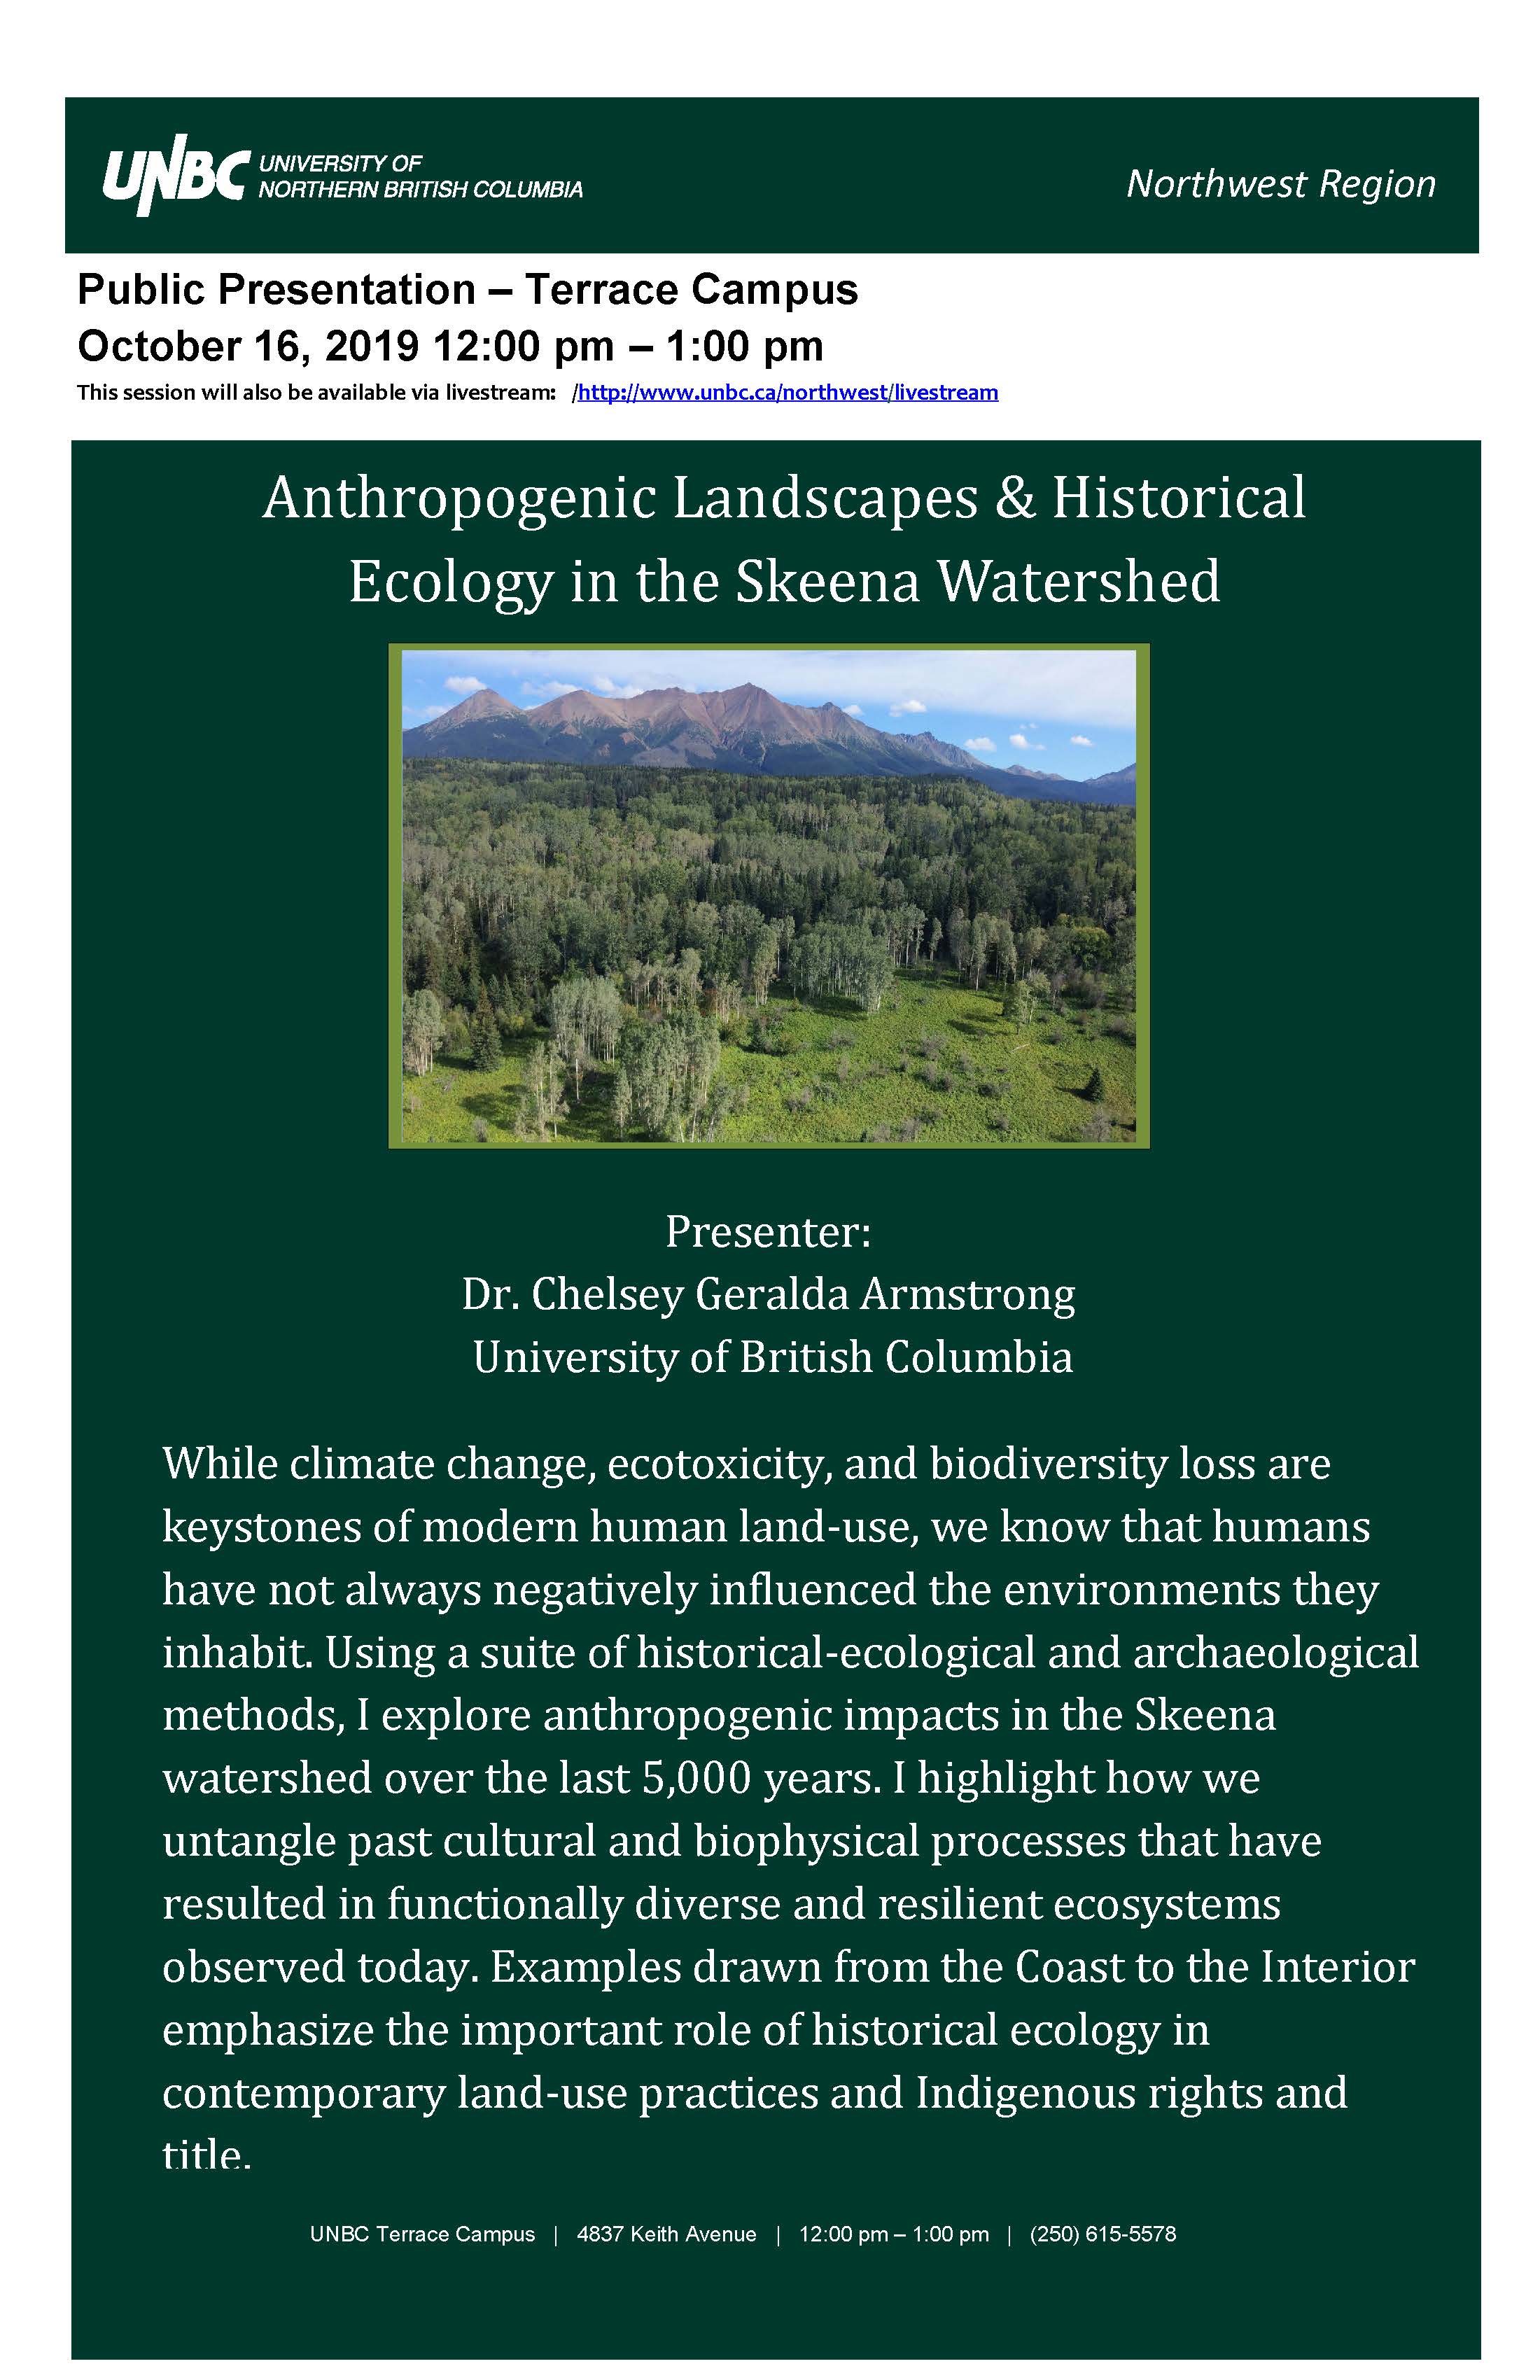 Public Presentation: Dr. Chelsey Geralda Armstrong - "Anthropogenic Landscapes & Historical Ecology in the Skeena Watershed"